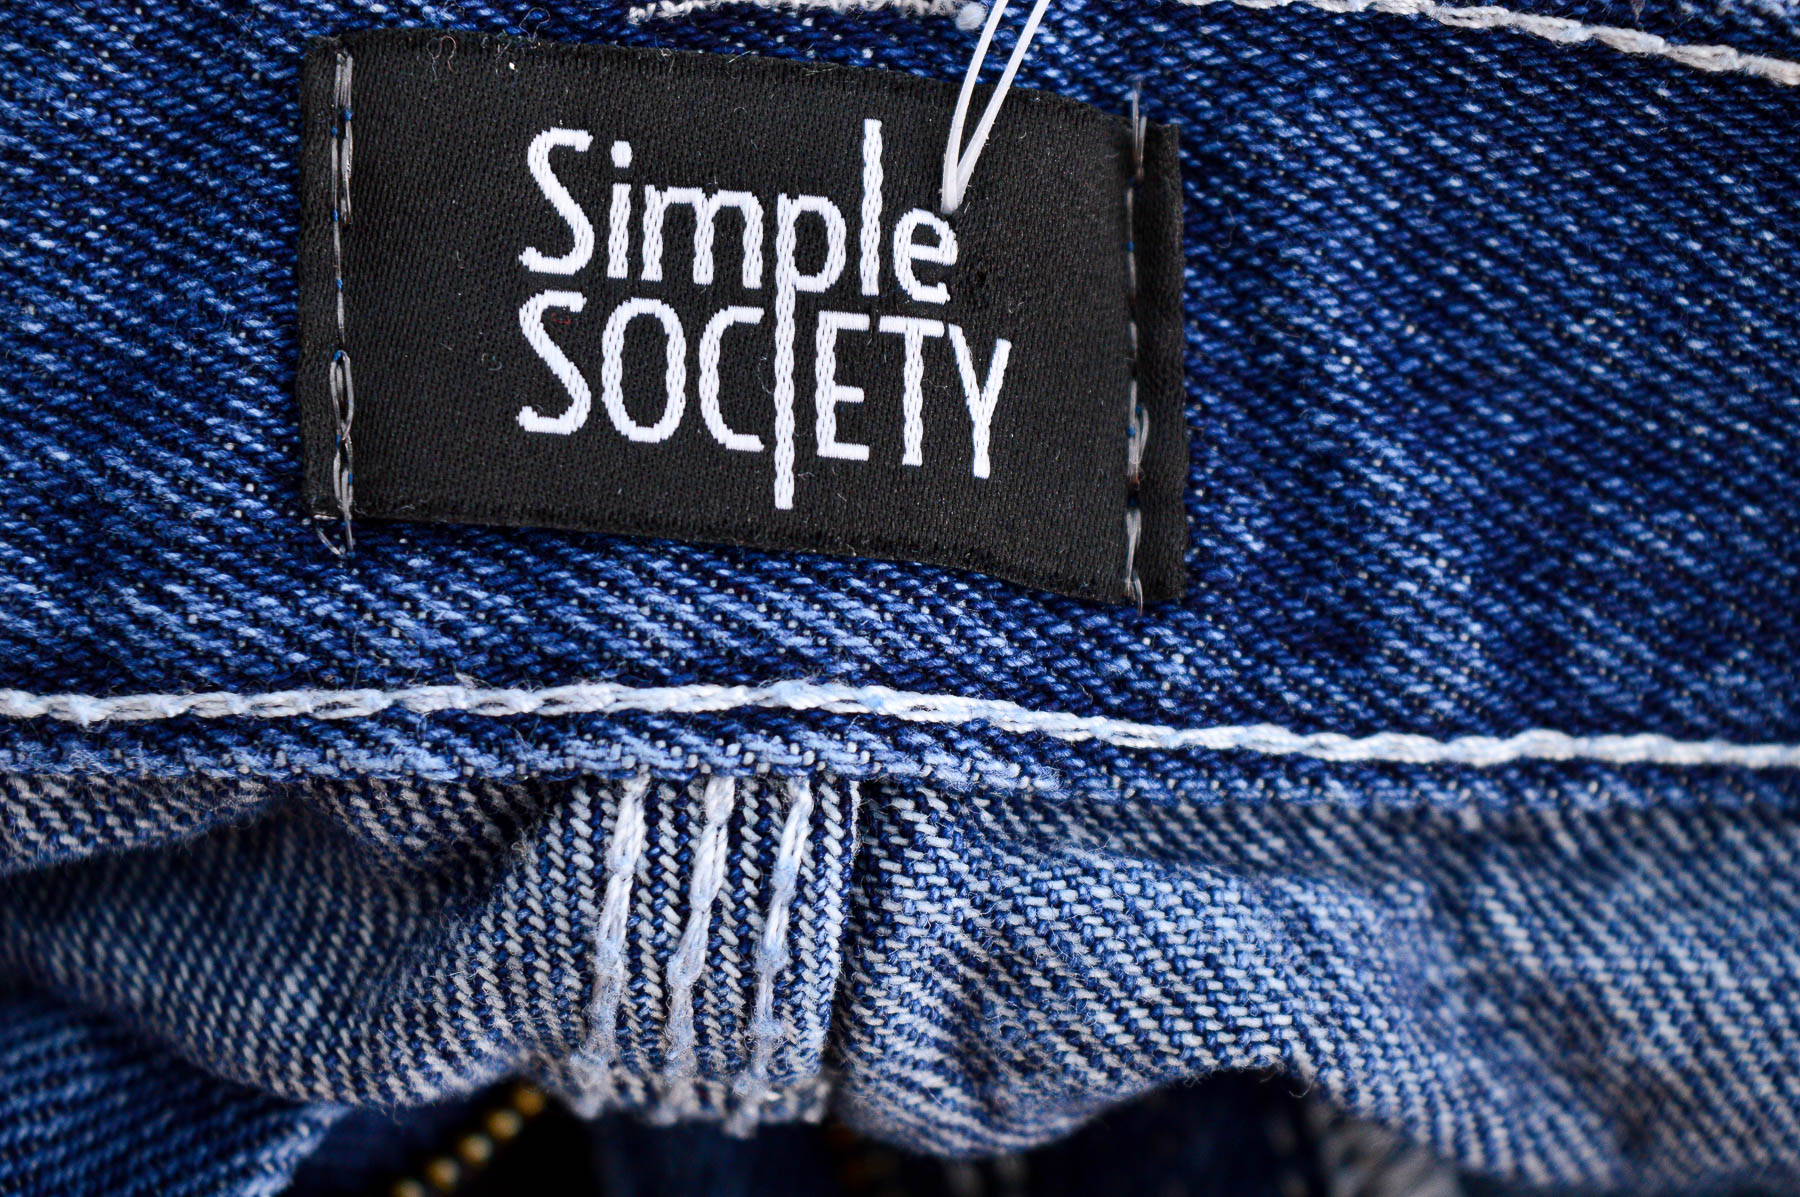 Women's jeans - Simple Society - 2